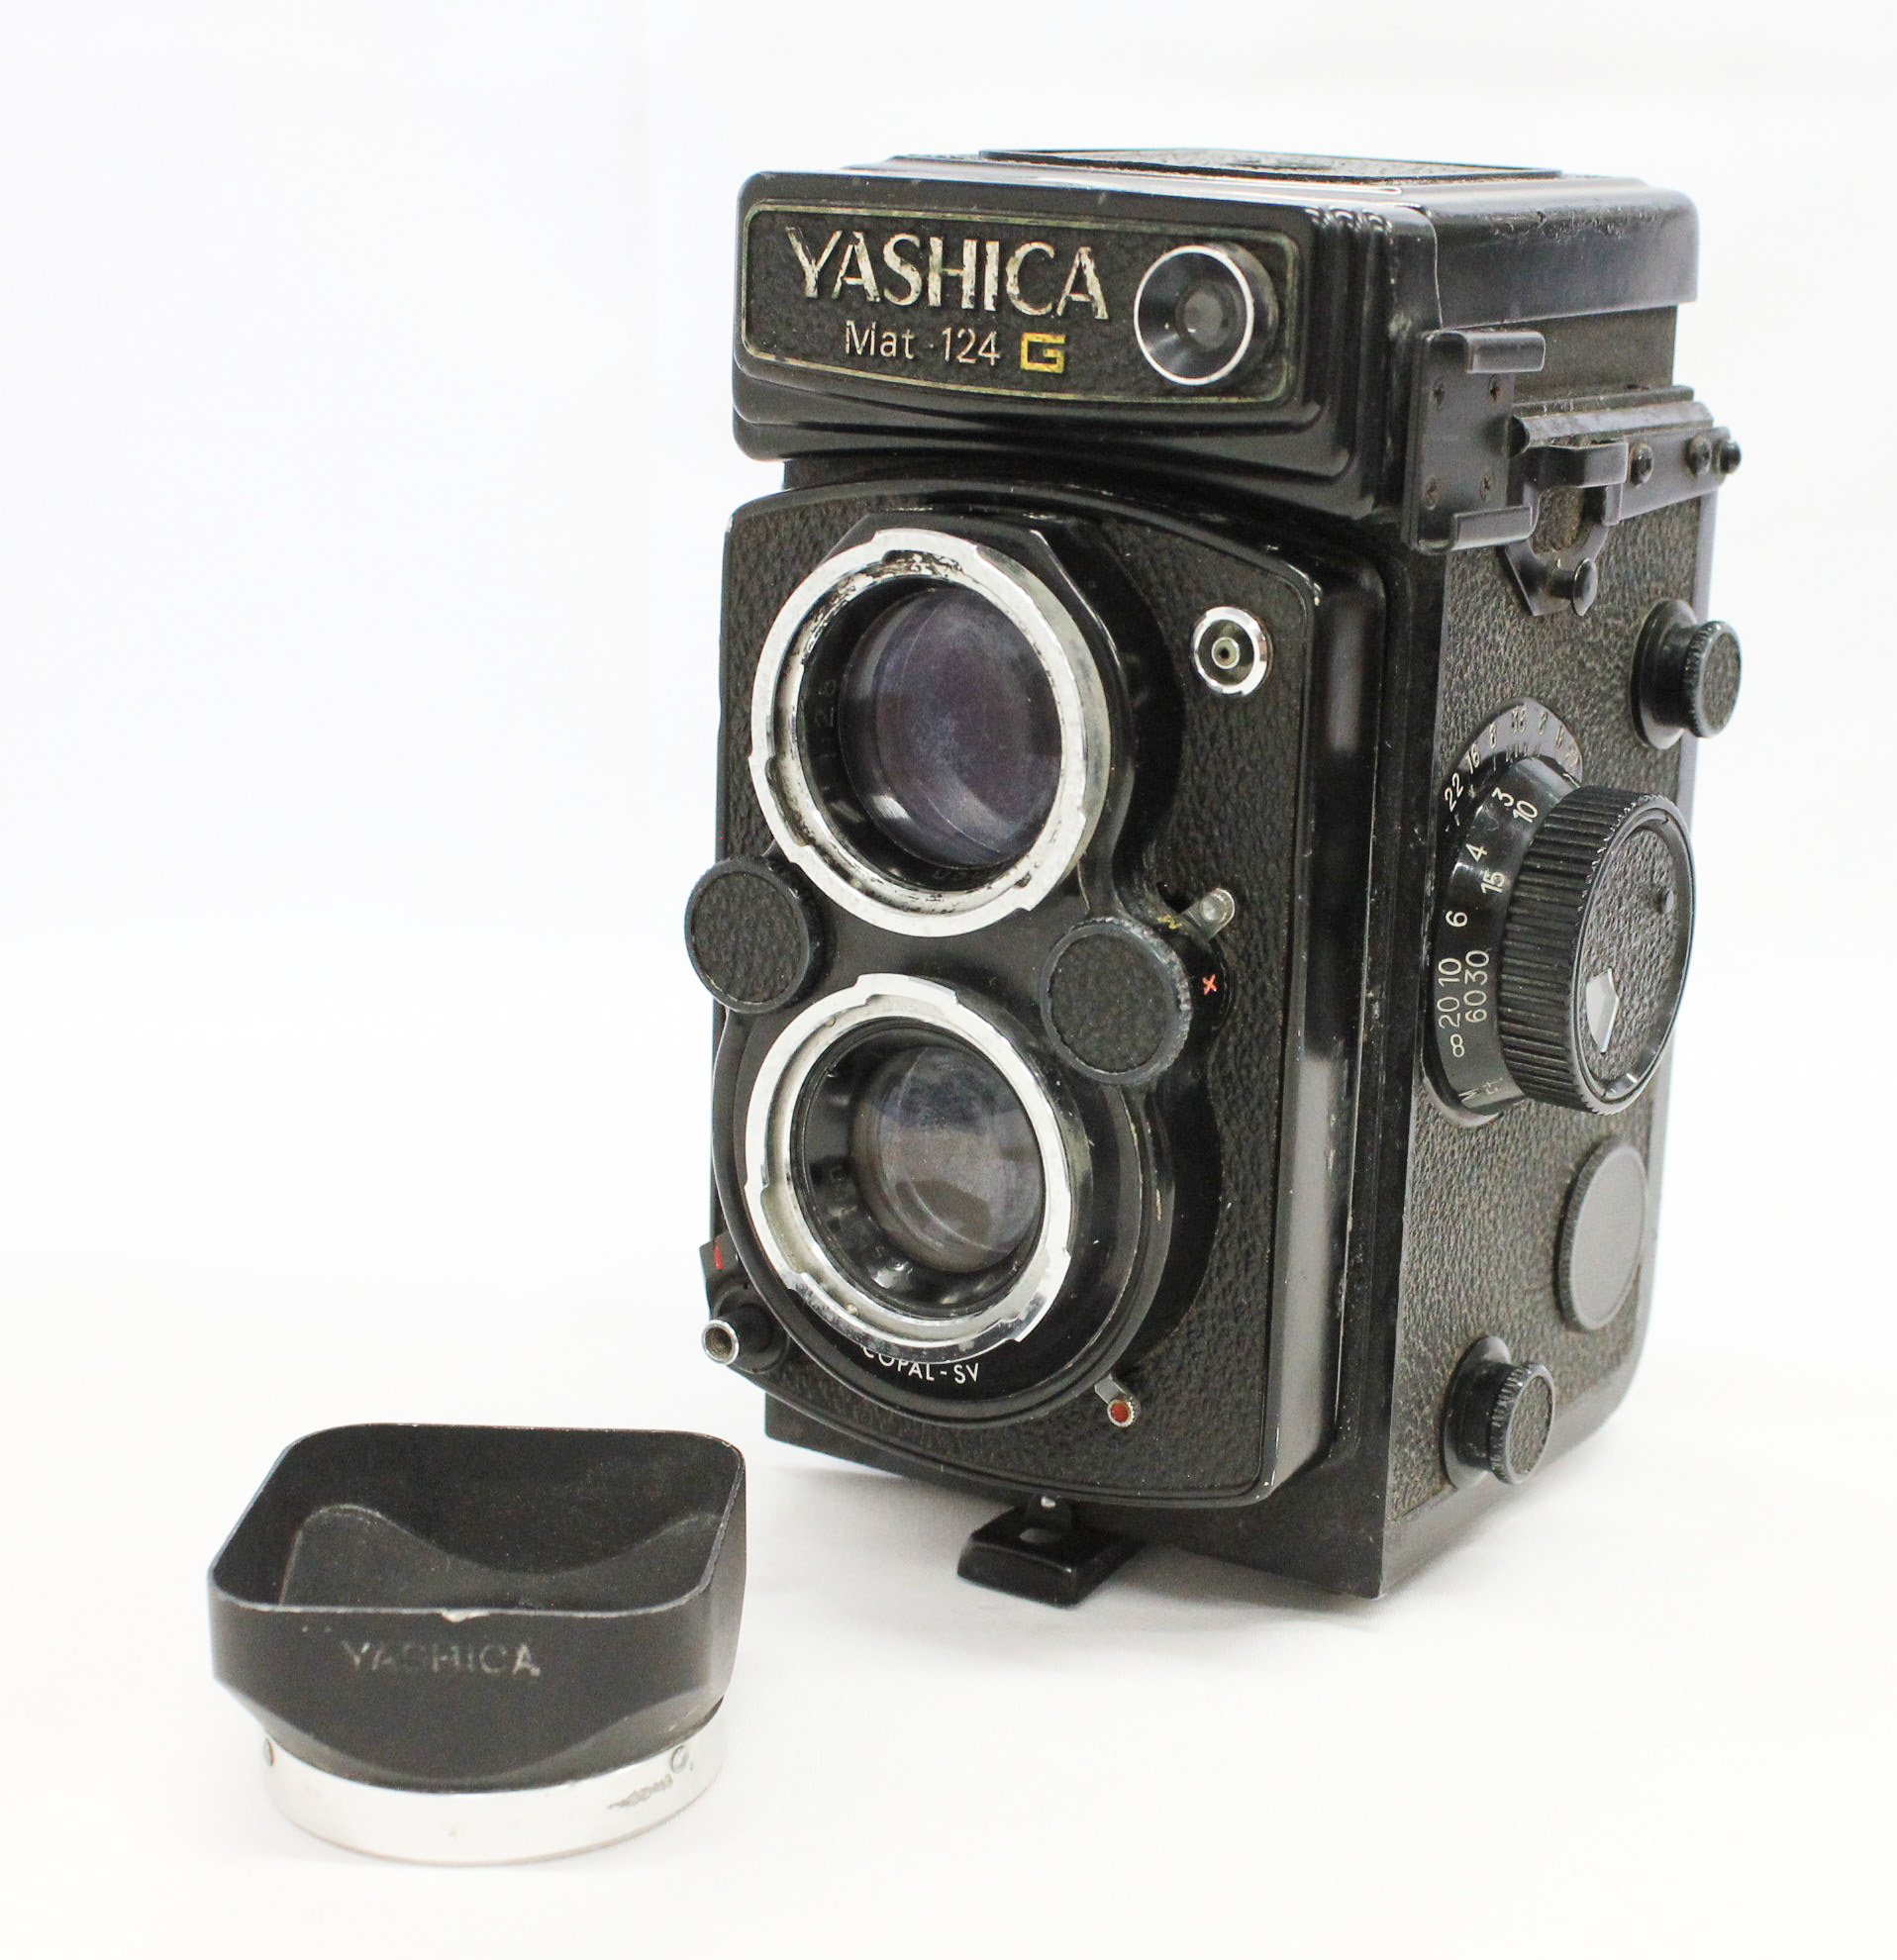 [Excellent+++] Yashica Mat 124G 6x6 Medium Format TLR Film Camera Yashinon Lens 80mm with Hood from Japan